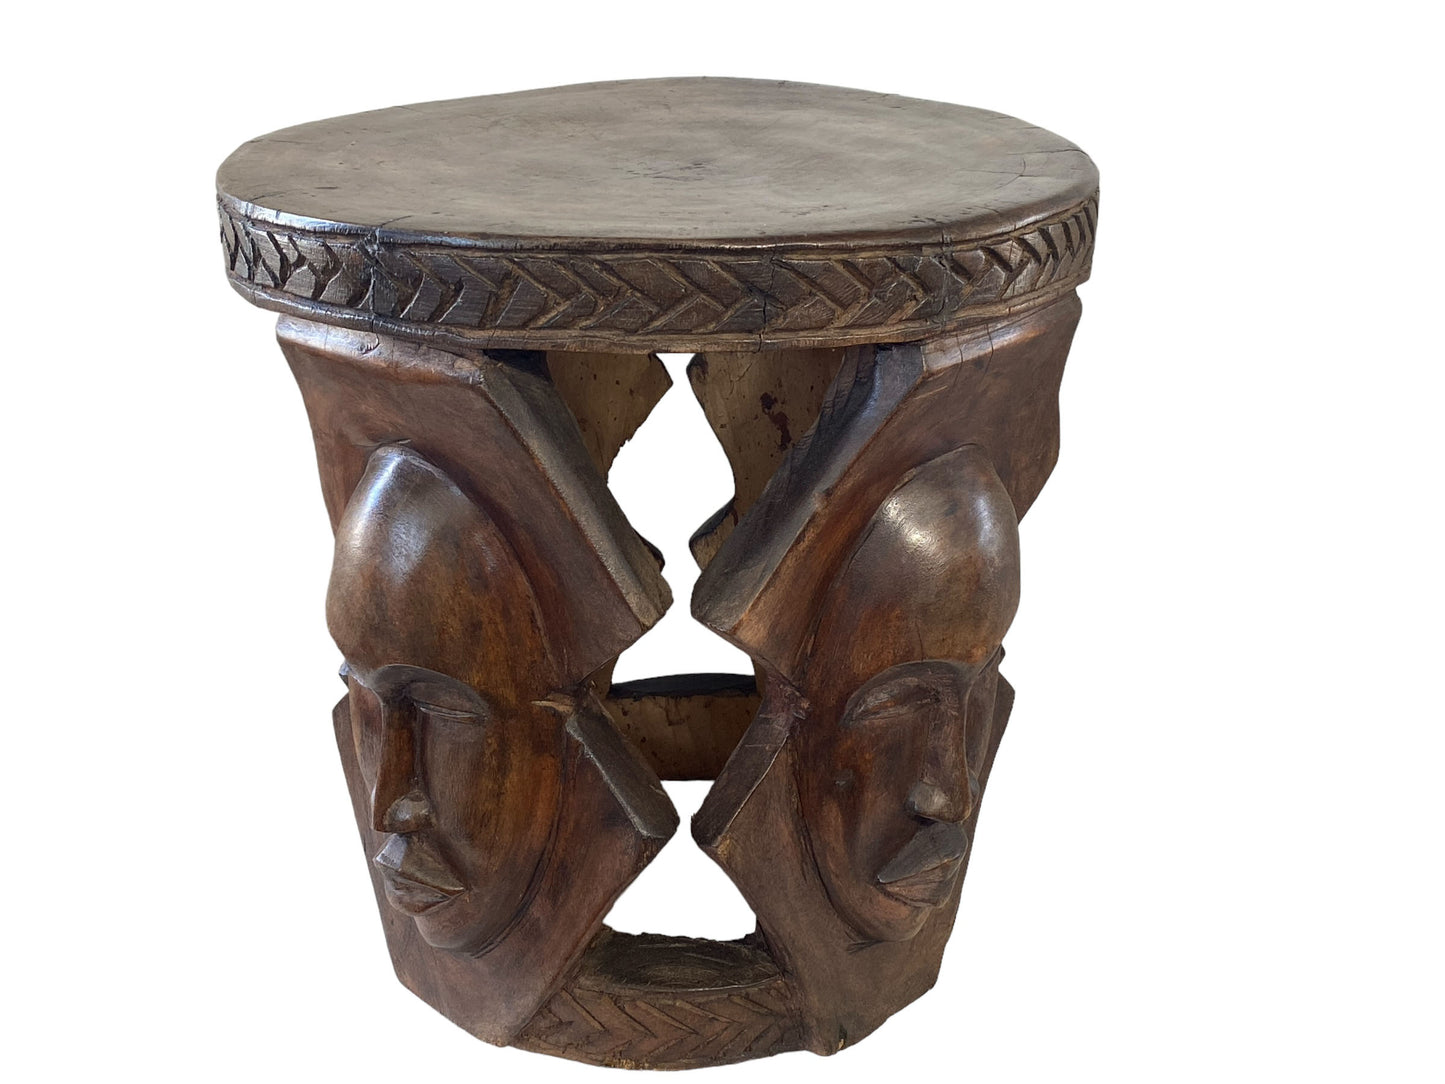 #5947 Superb LG African Carved wood  Baga  Stool/Table  Guinea 19" H